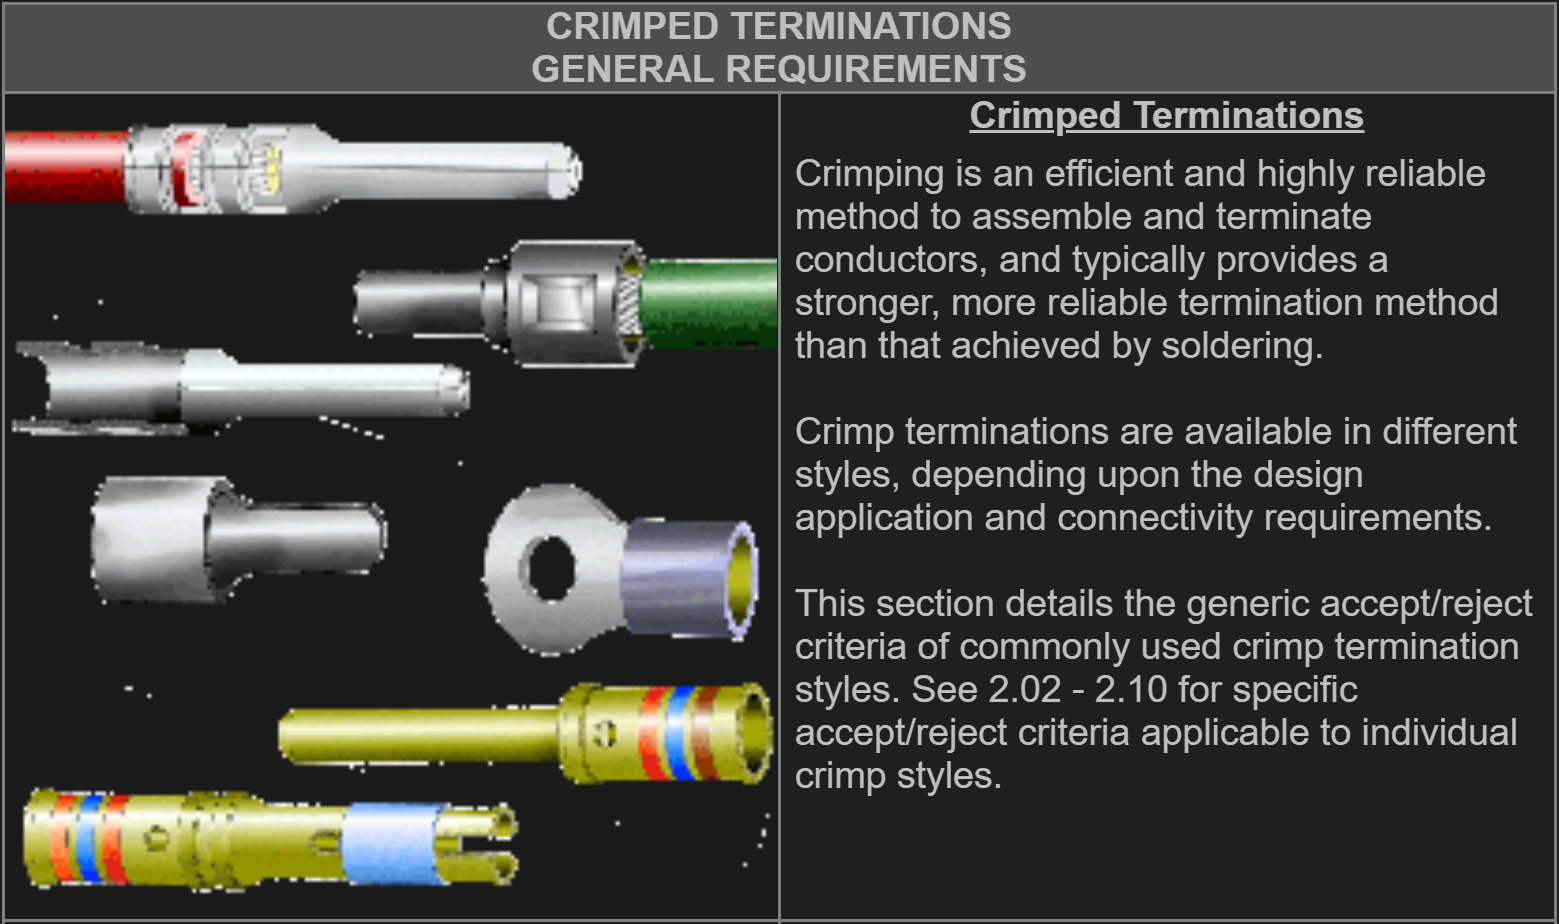 CRIMPED TERMINATIONS GENERAL REQUIREMENTS